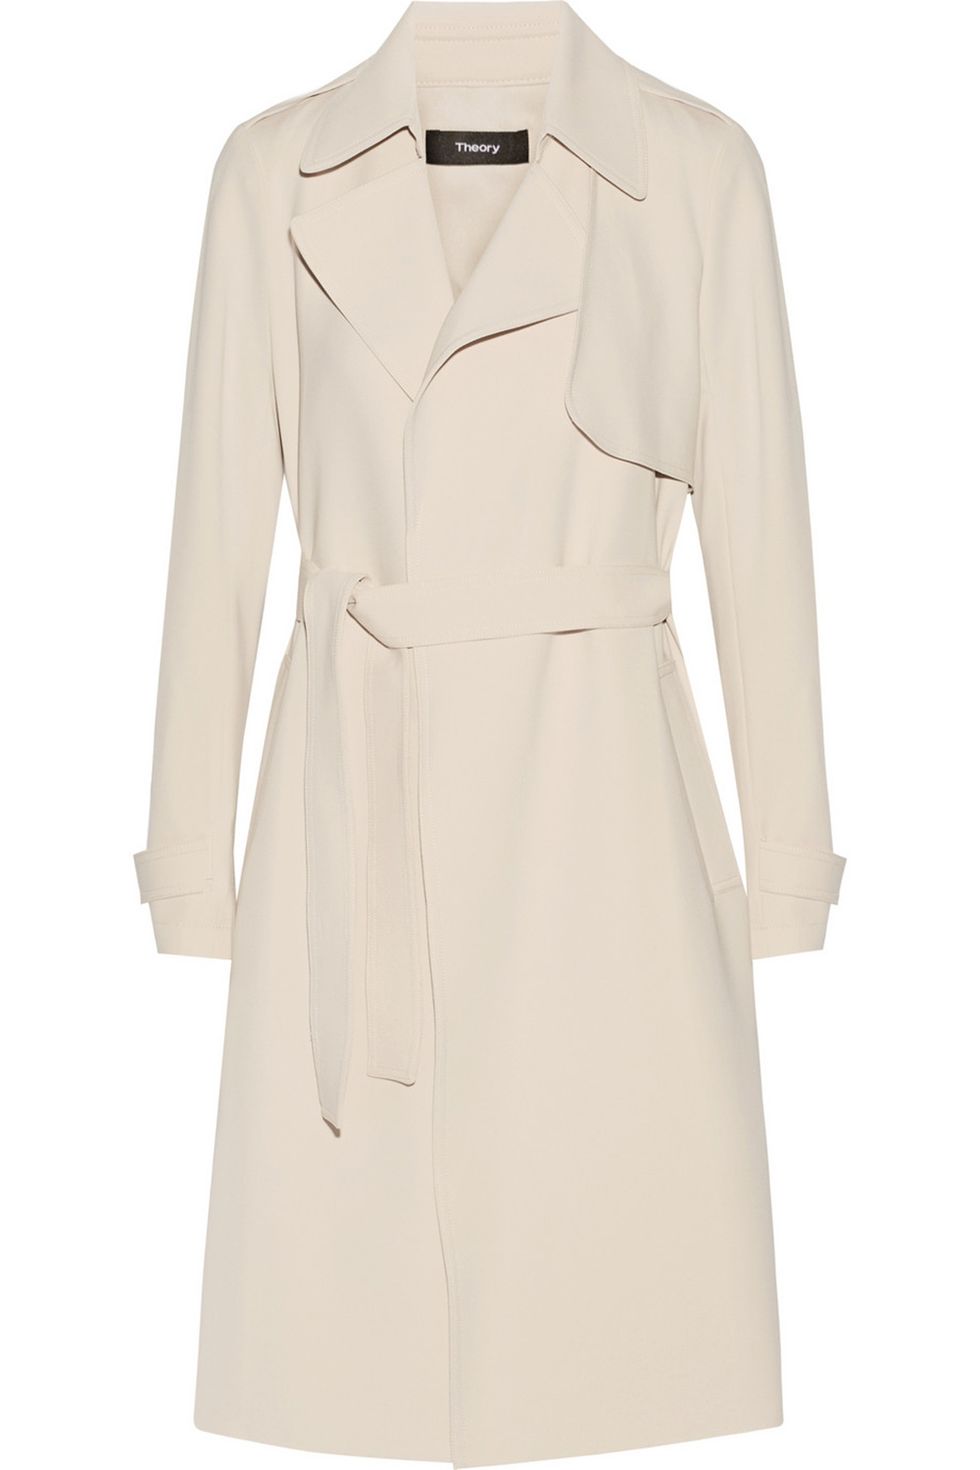 <p>Theory trench, $595, <a href="http://www.theory.com/OAKLANE-B/G0109402,default,pd.html?dwvar_G0109402_color=001&start=2&cgid=womens-outerwear" target="_blank">theory.com</a>.</p>